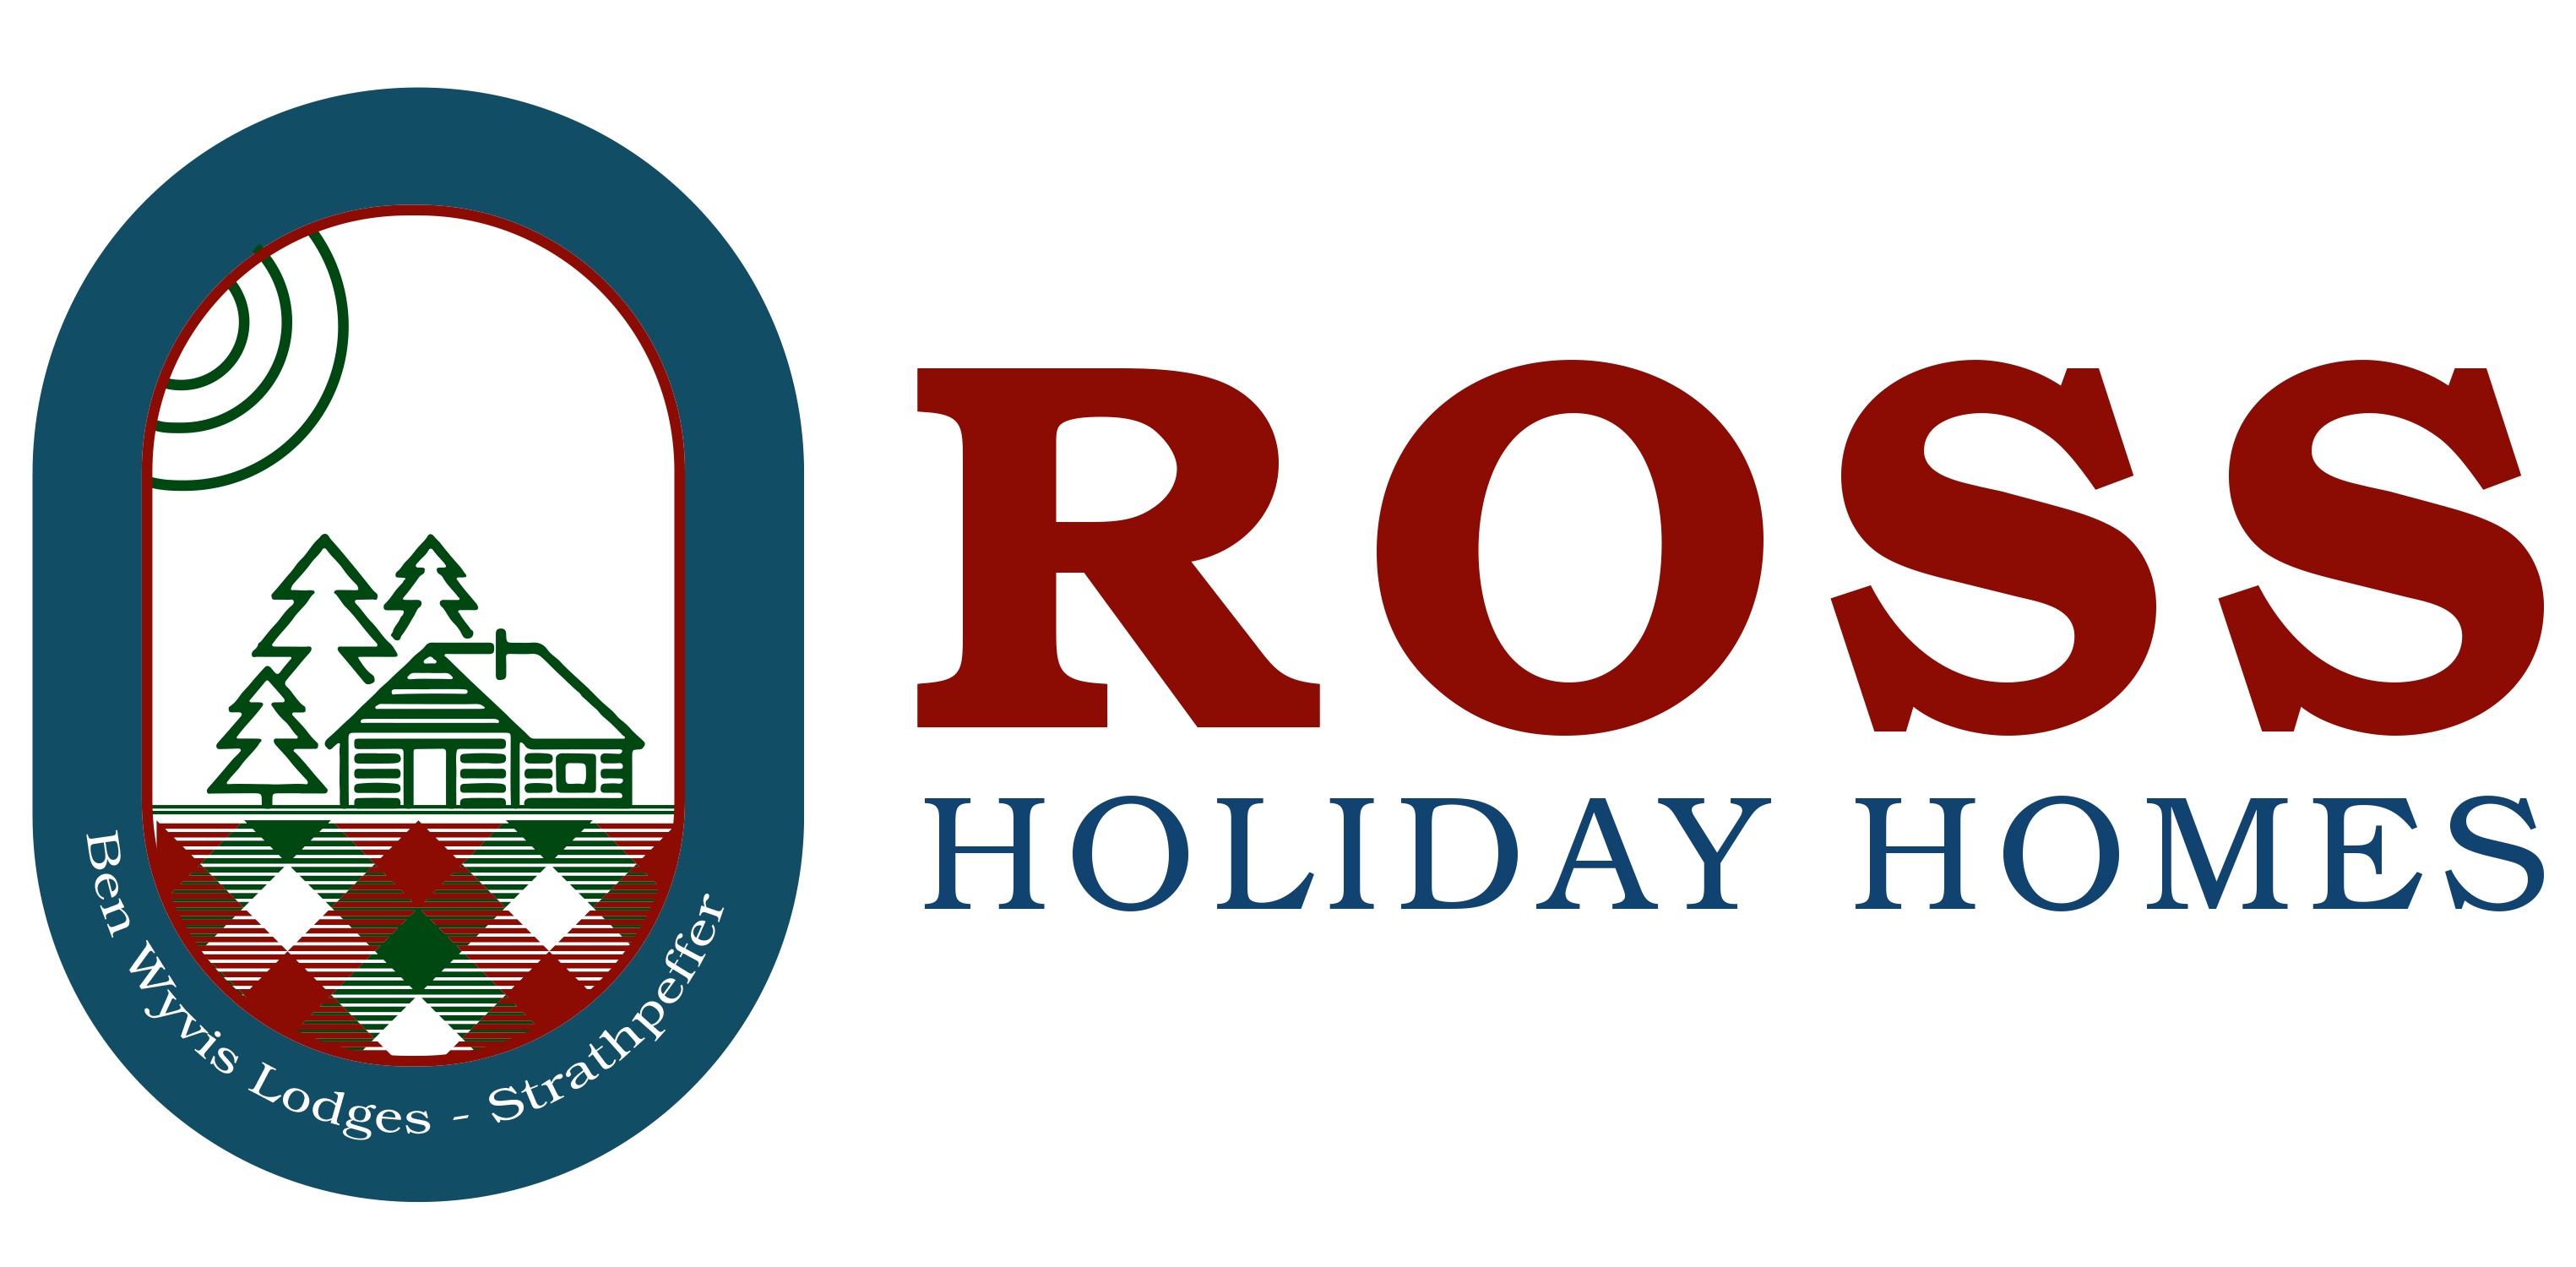 Ross Holiday Homes